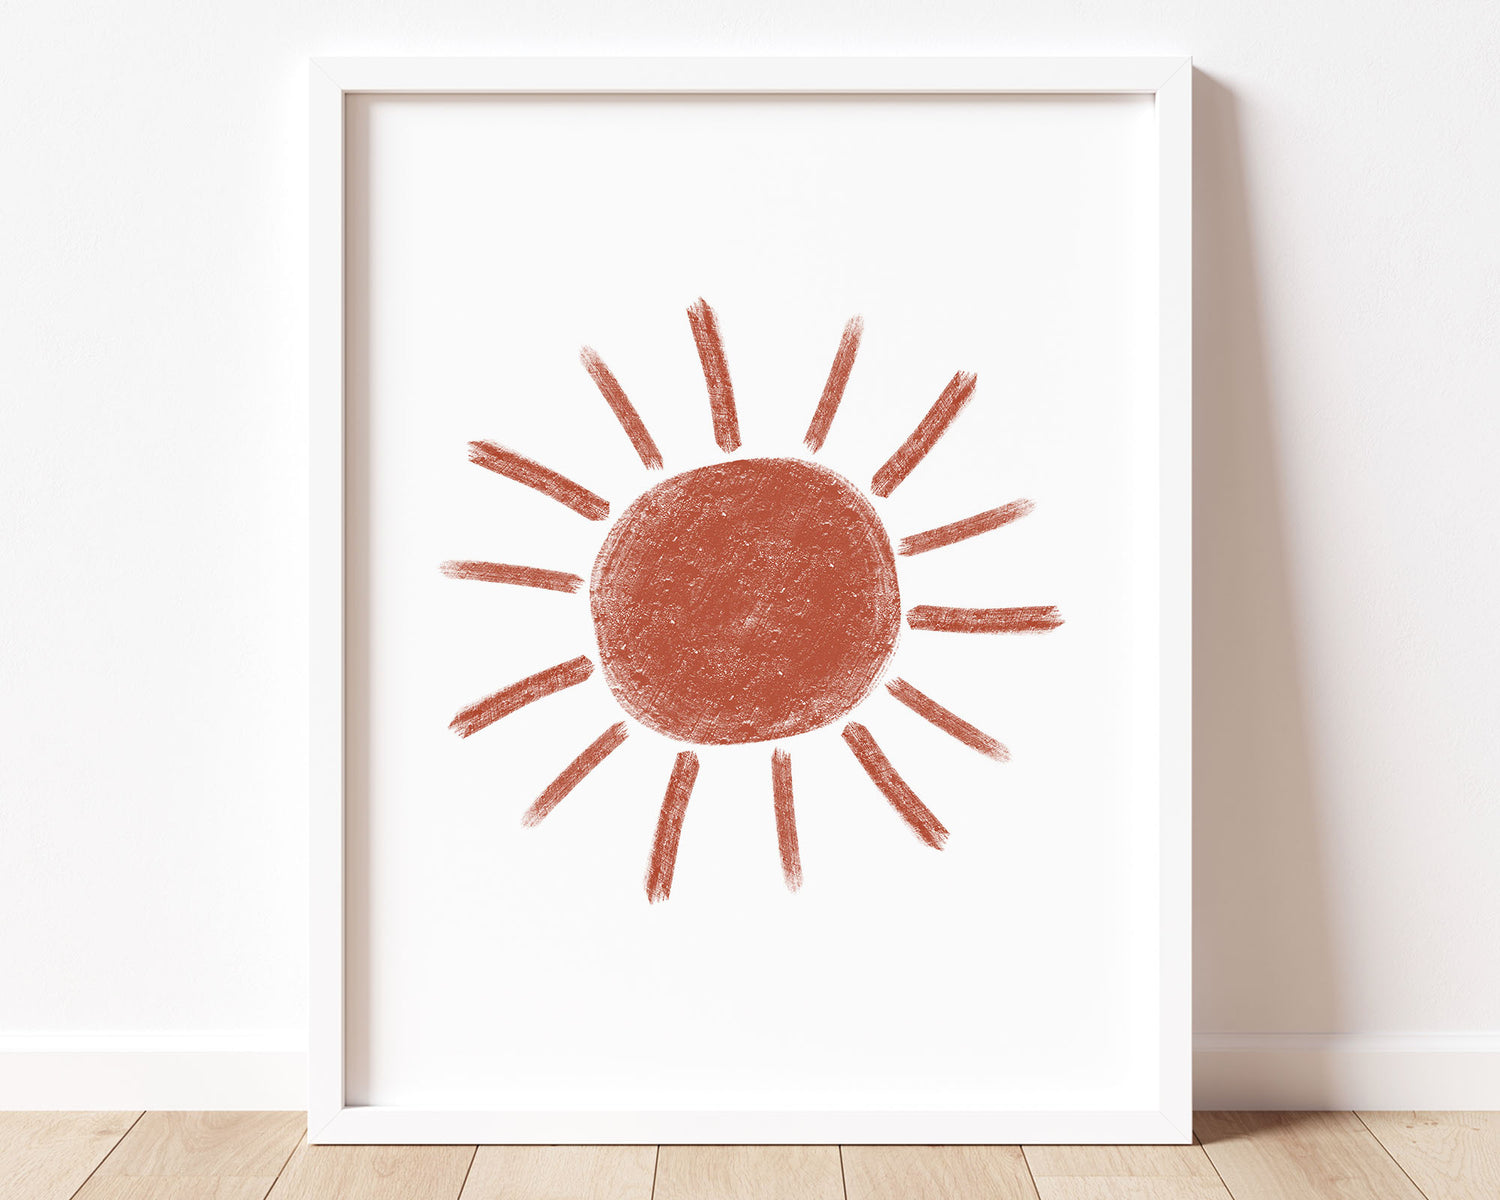 Burnt orange abstract sun in chalky brushstroke illlustration style perfect for Baby Nursery Décor, Little Boys Bedroom Wall Art, Toddler Girls Room Wall Hangings, Kiddos Bathroom Wall Art and Childrens Playroom Décor.